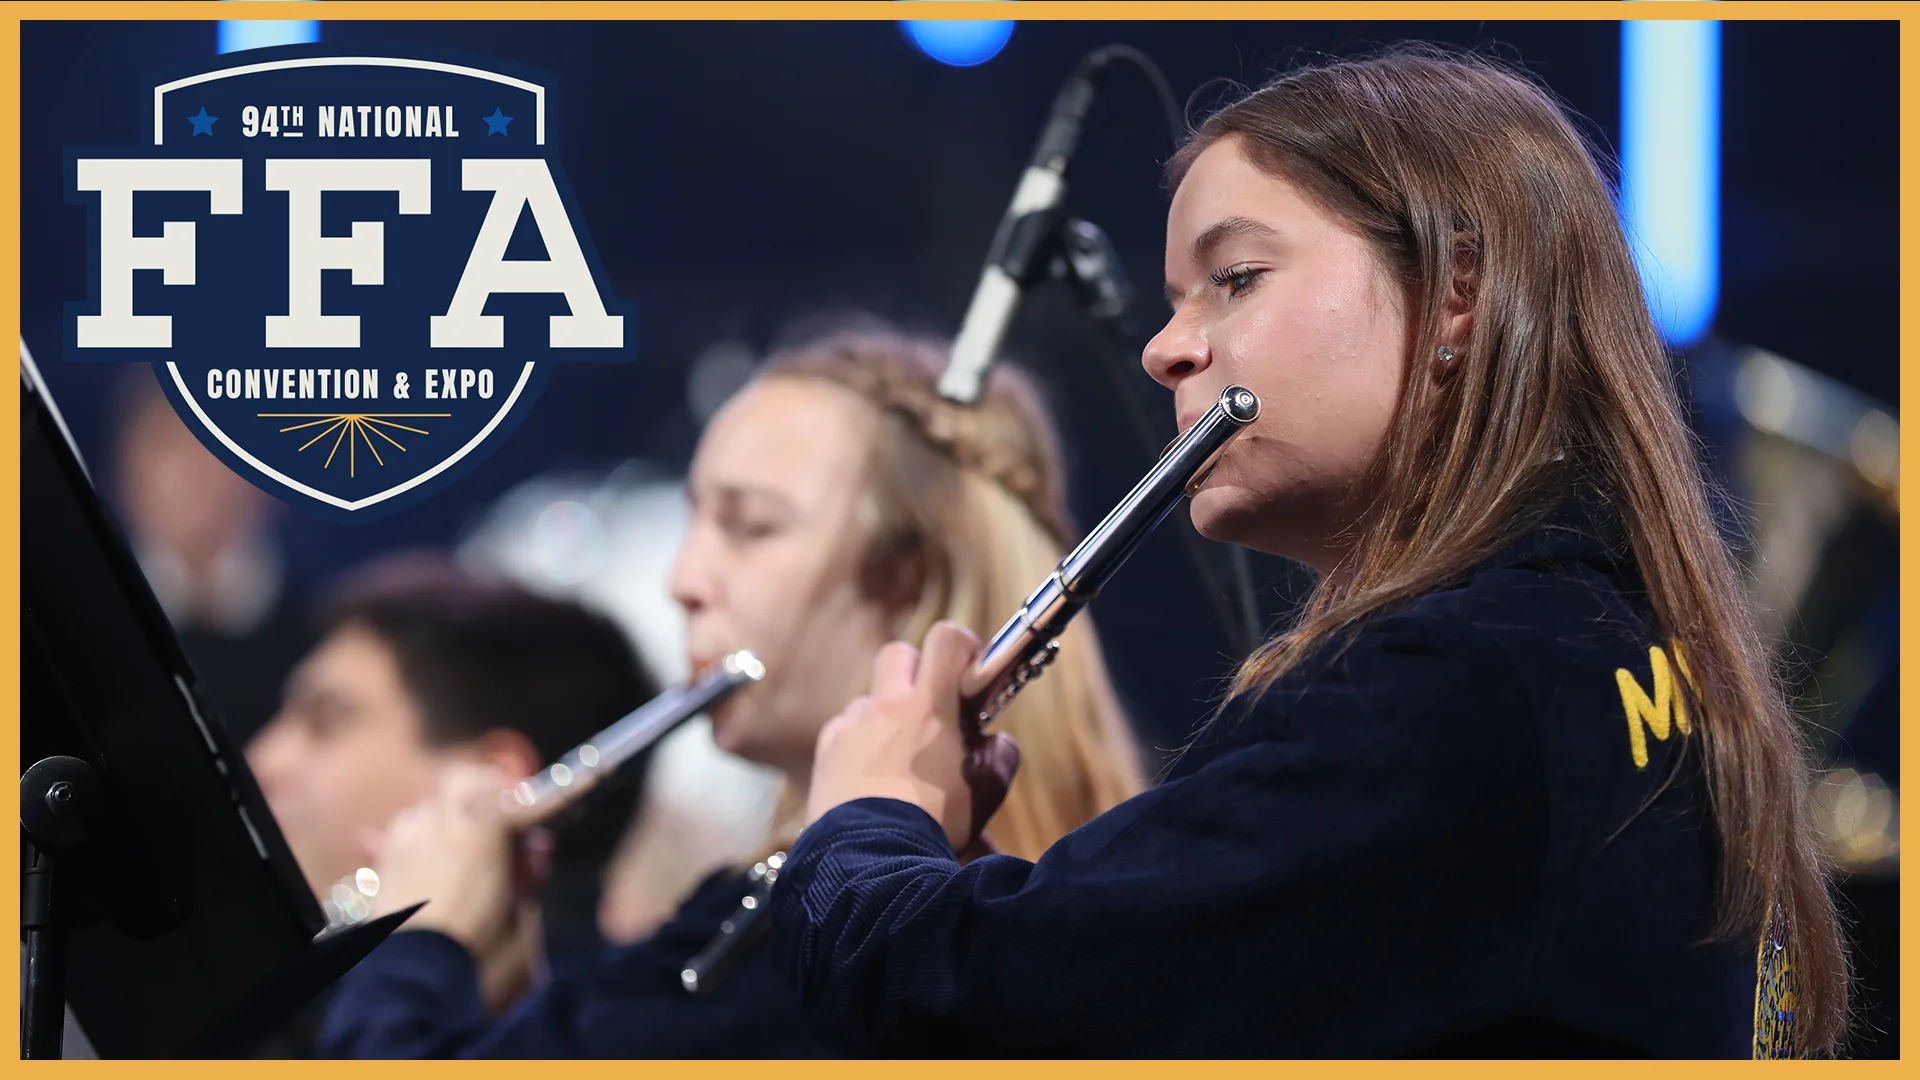 National FFA Band (Session 5) 94th National FFA Convention & Expo on